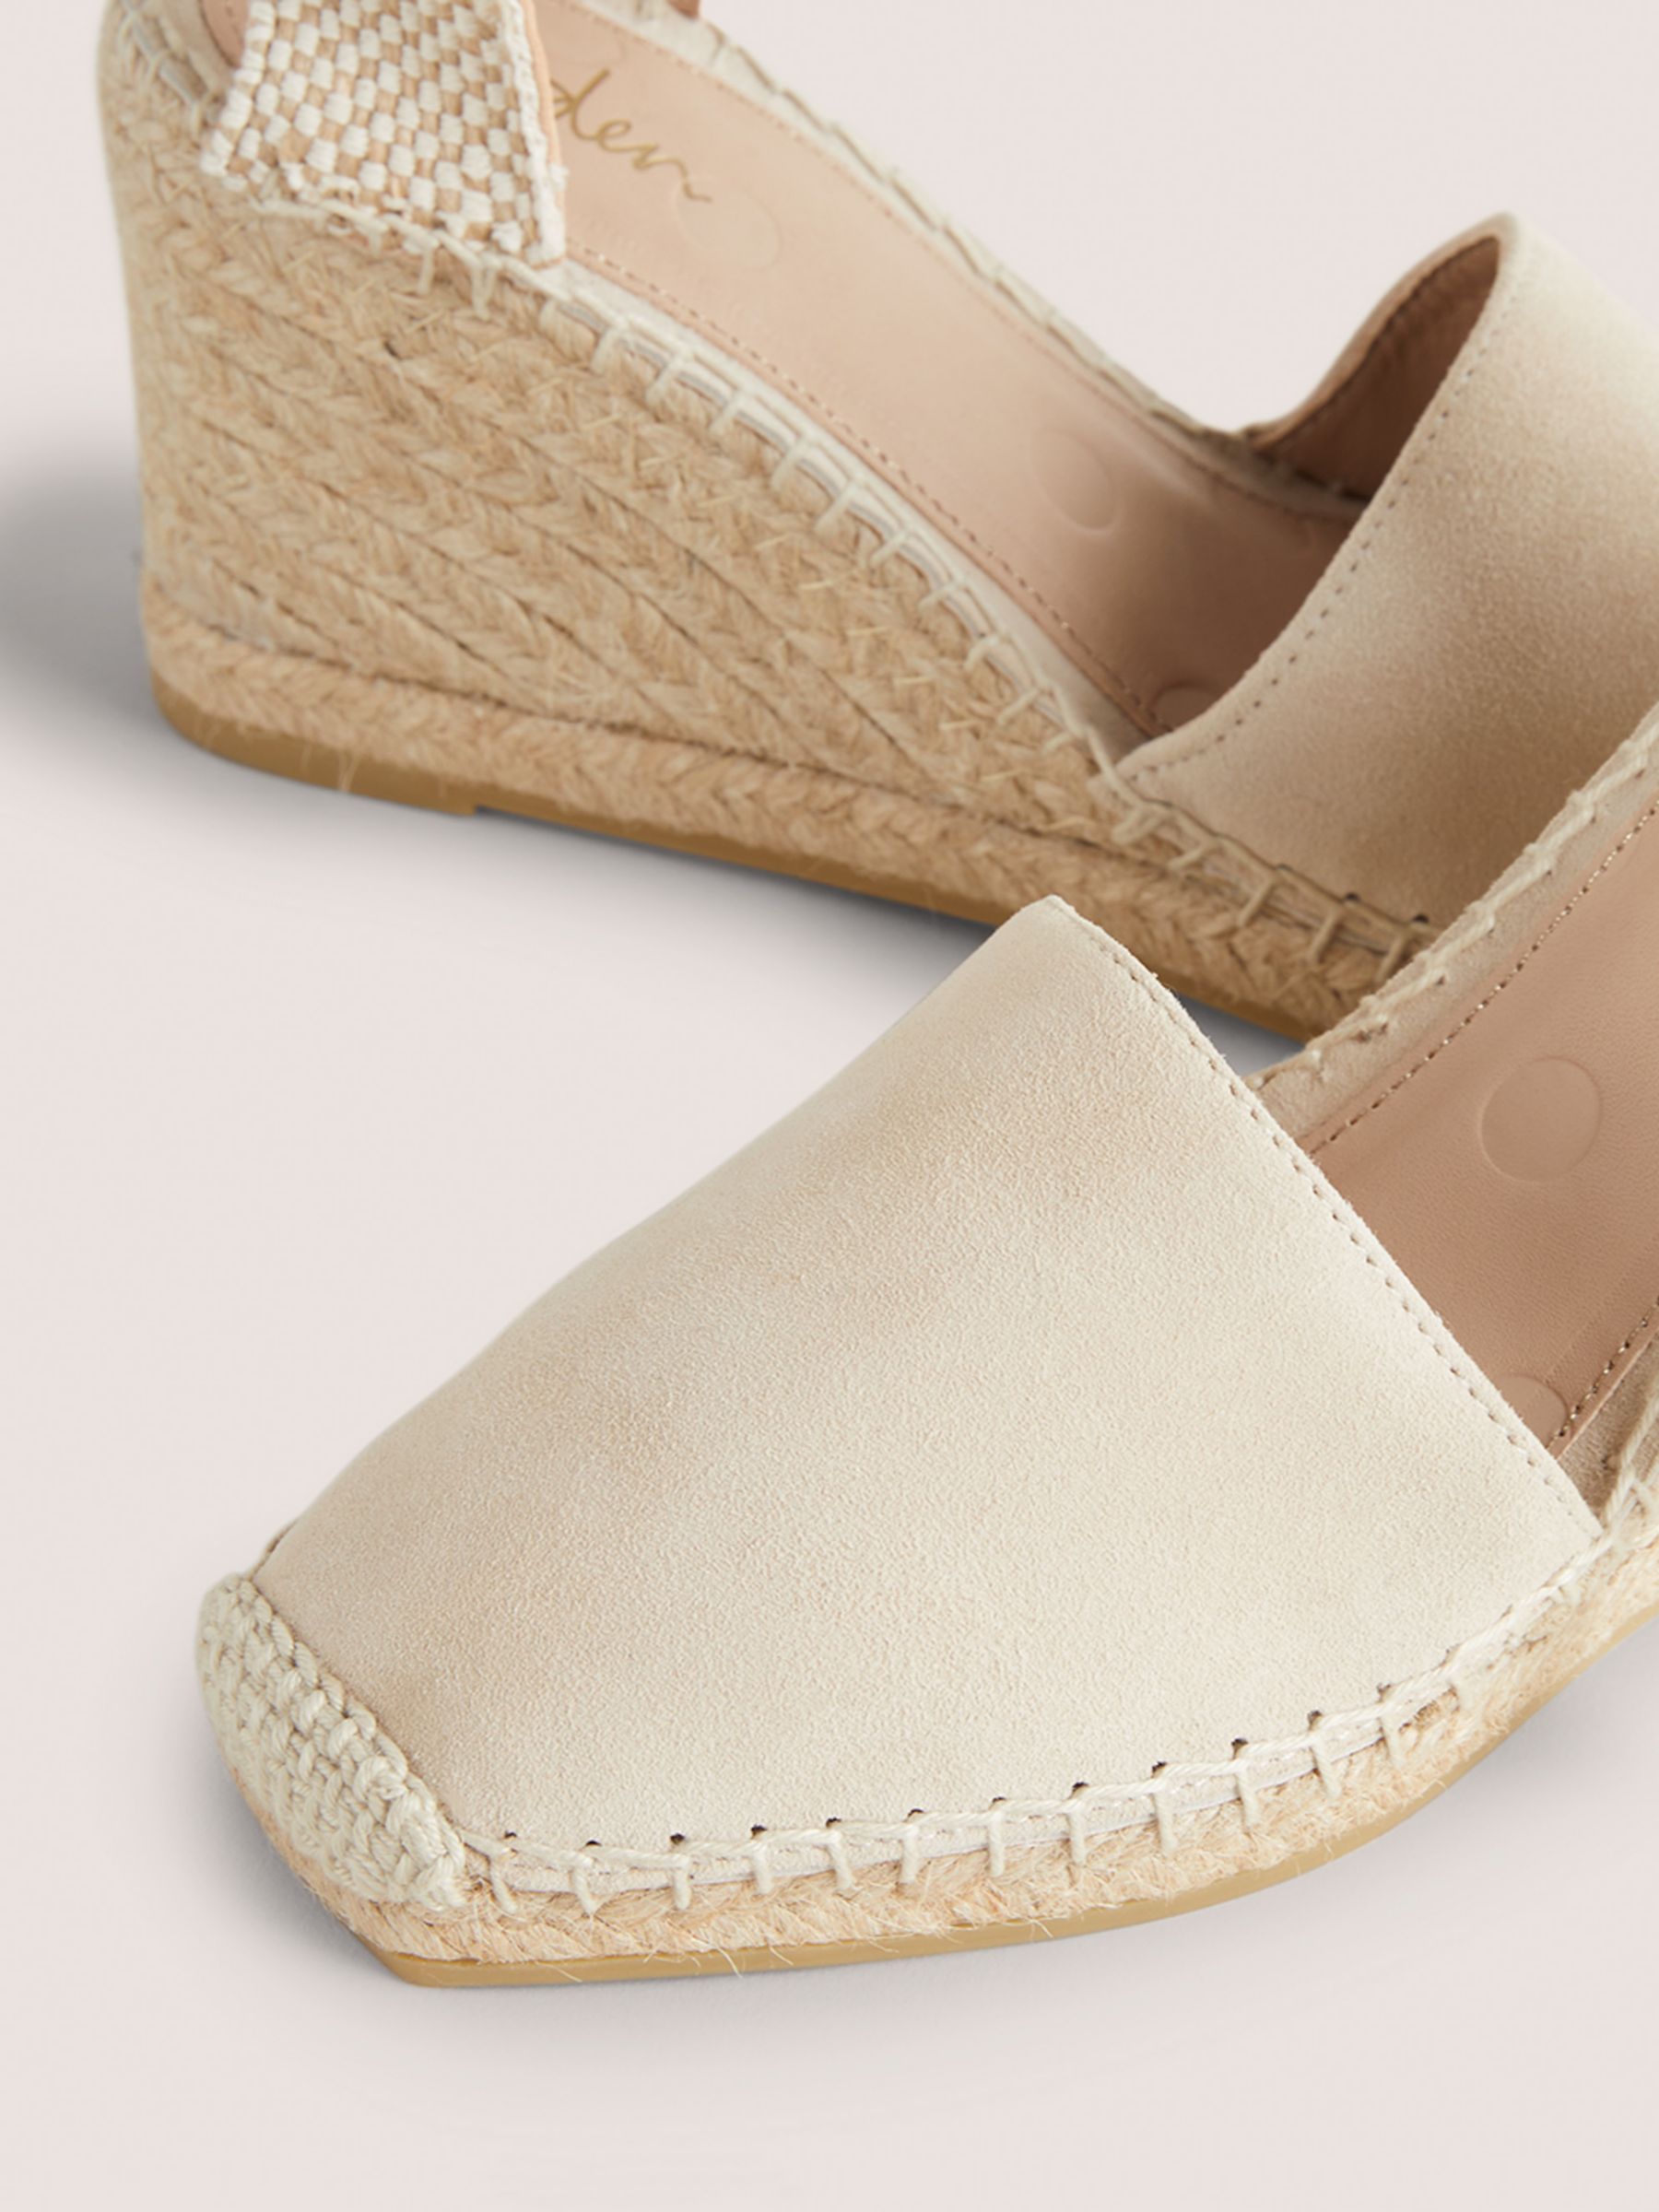 Boden Modern Suede Wedge Espadrilles, Oatmeal at John Lewis & Partners